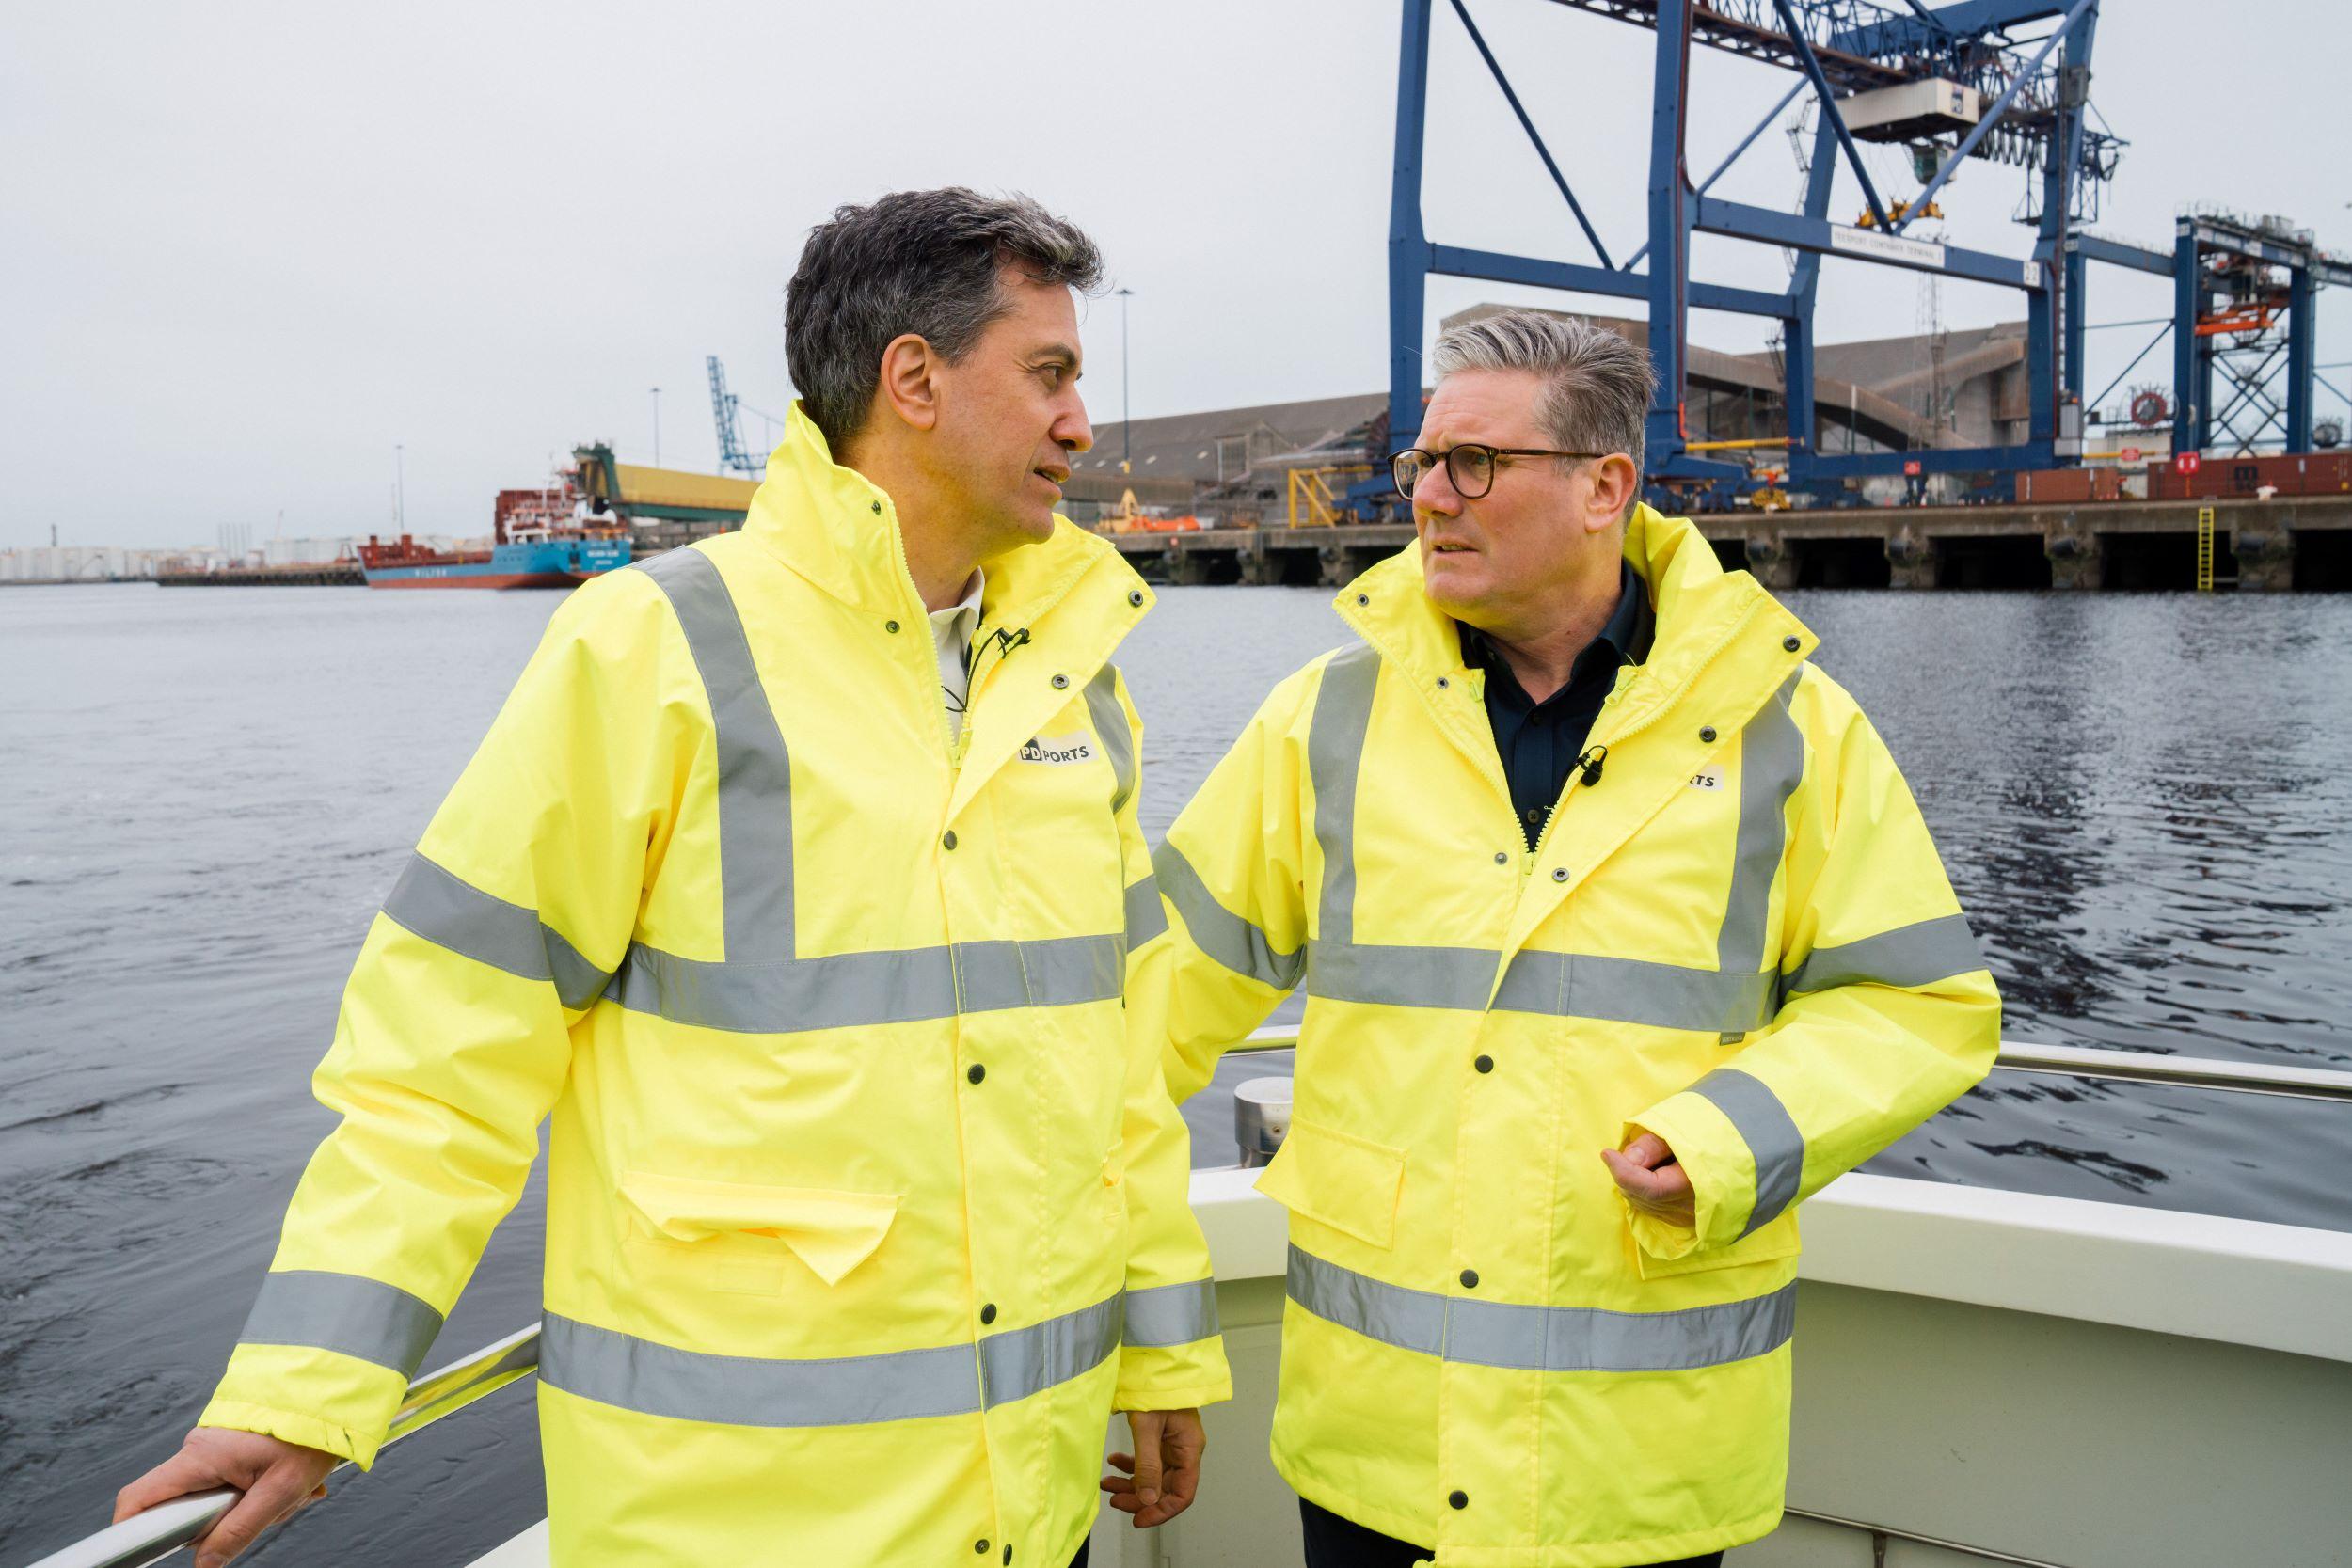 Labour Party leader Keir Starmer with shadow energy secretary Ed Miliband at a port